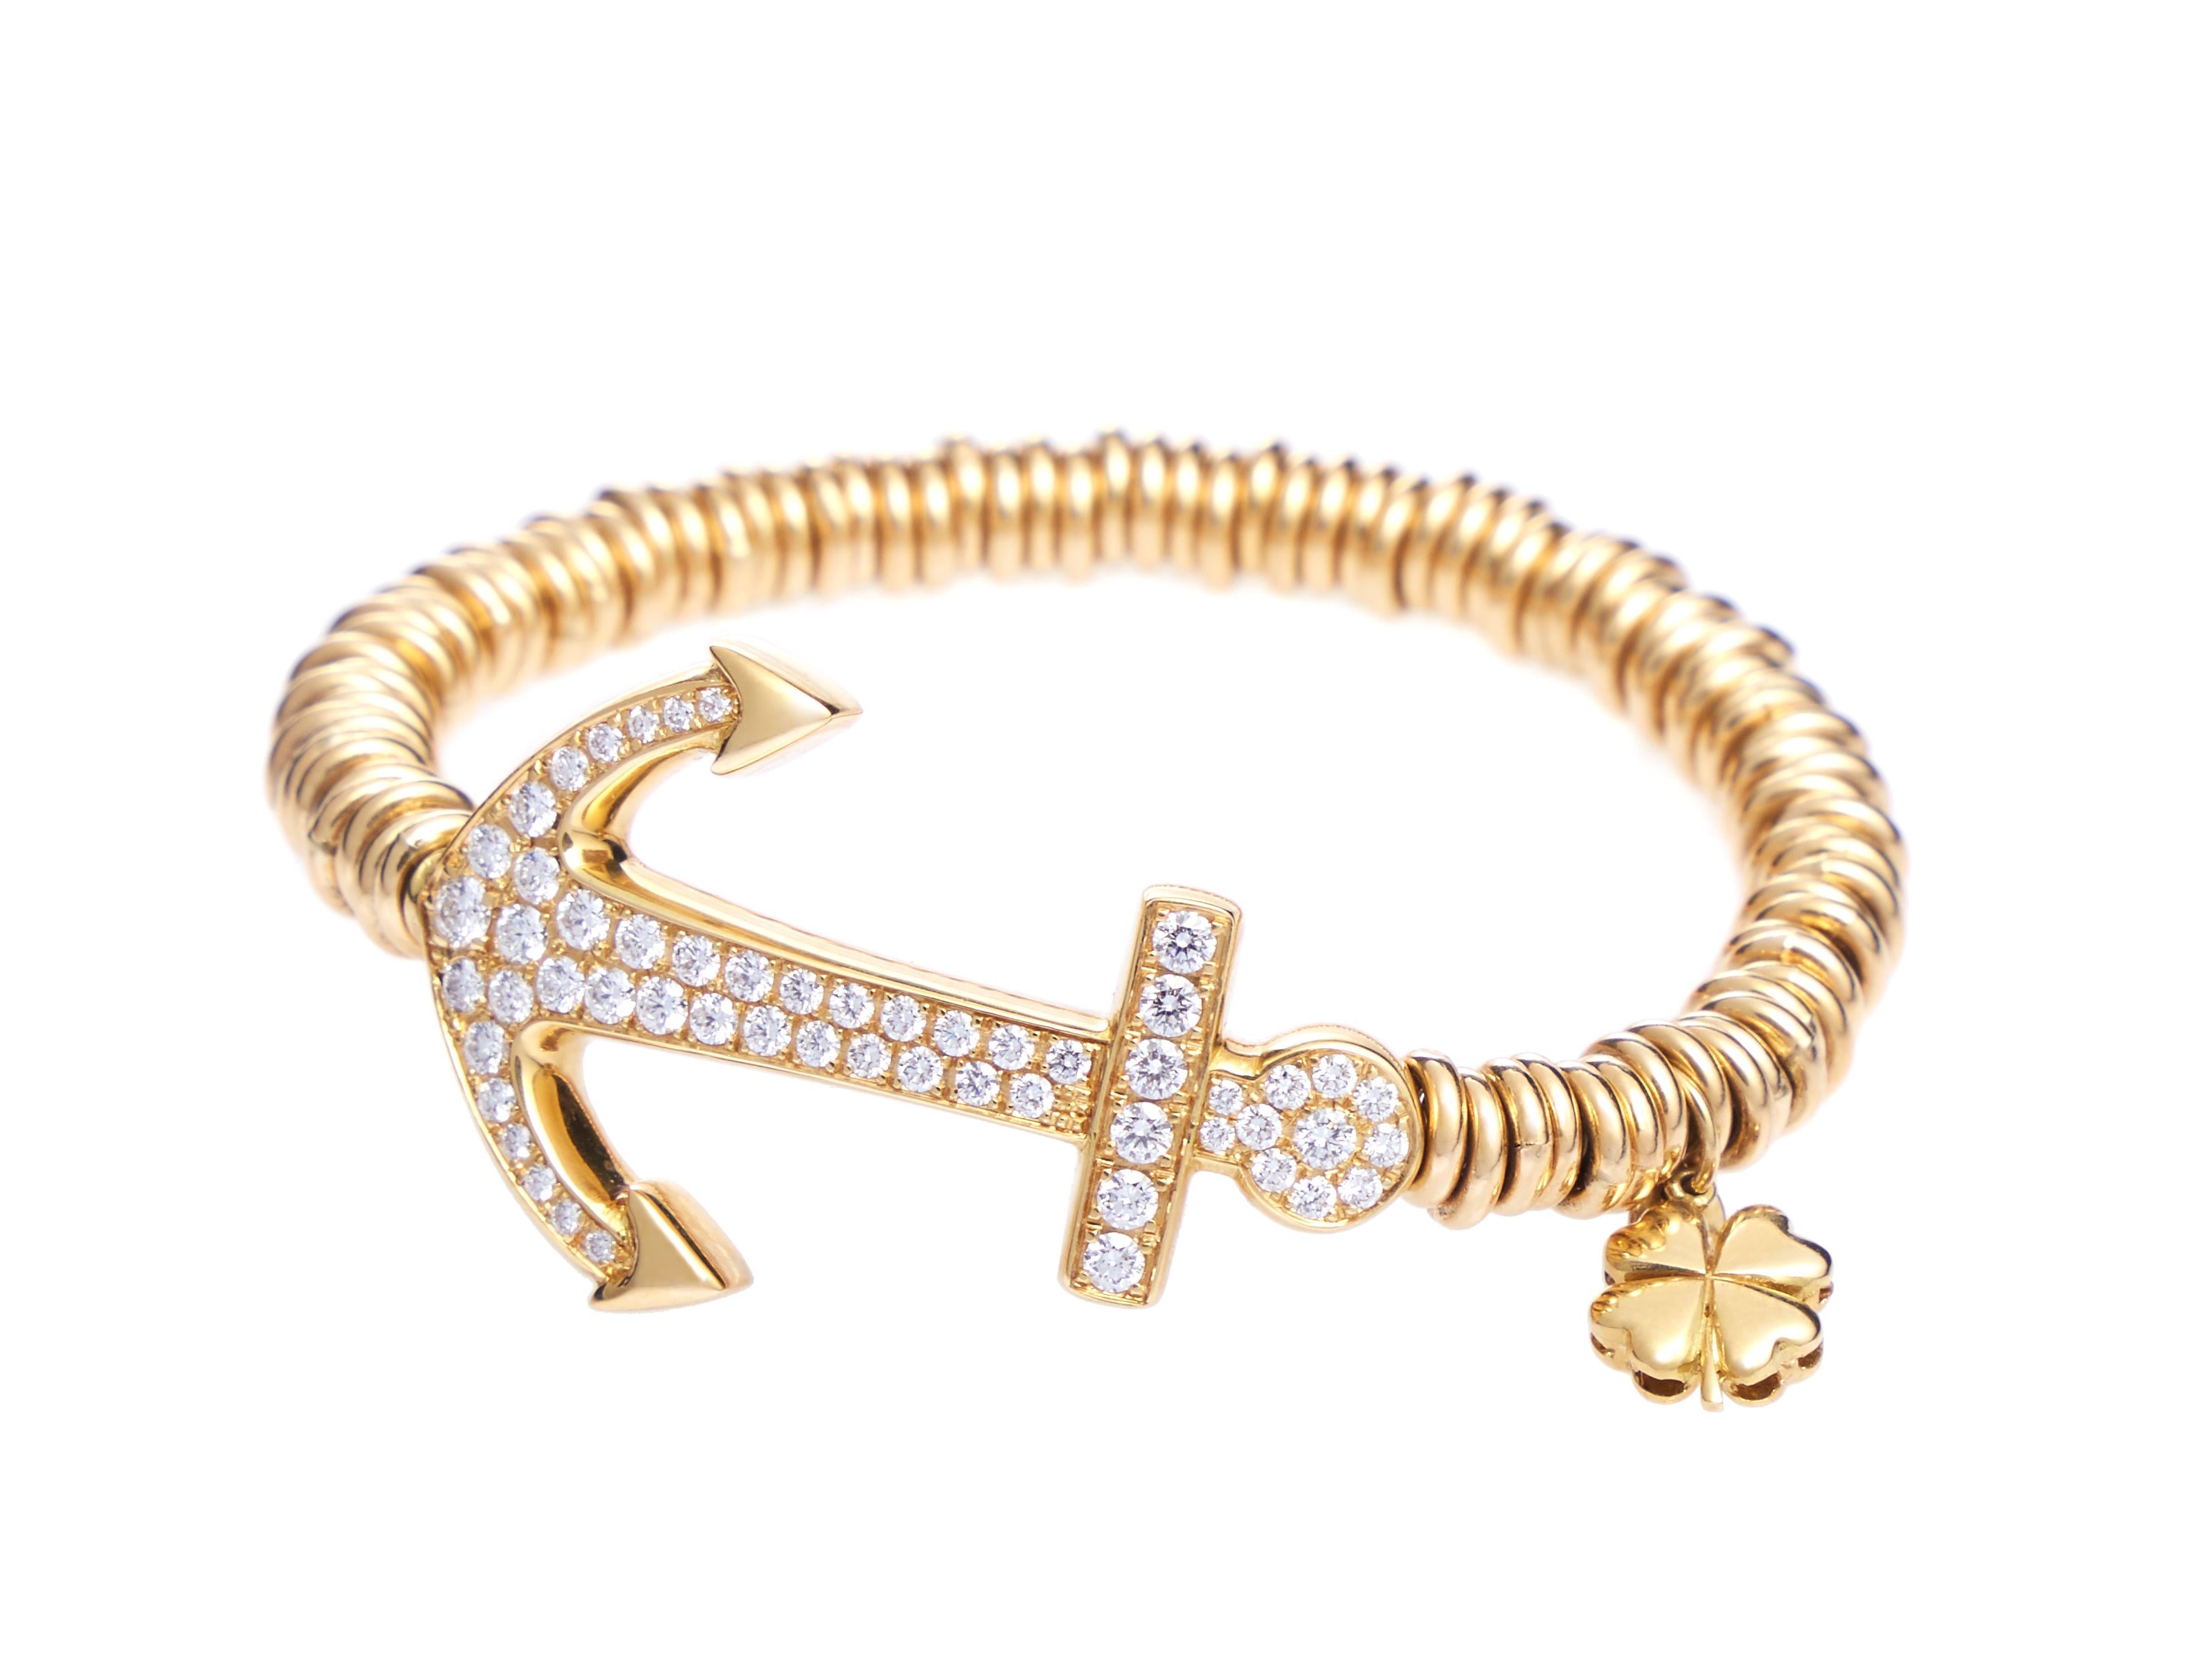 This exquisite 18 karat yellow gold stretch bracelet showcases an anchor with 55 sparkling round diamonds, to create a tasteful and eye-catching look. The expanding stretching action makes this bracelet easy and comfortable to slip on and off, while